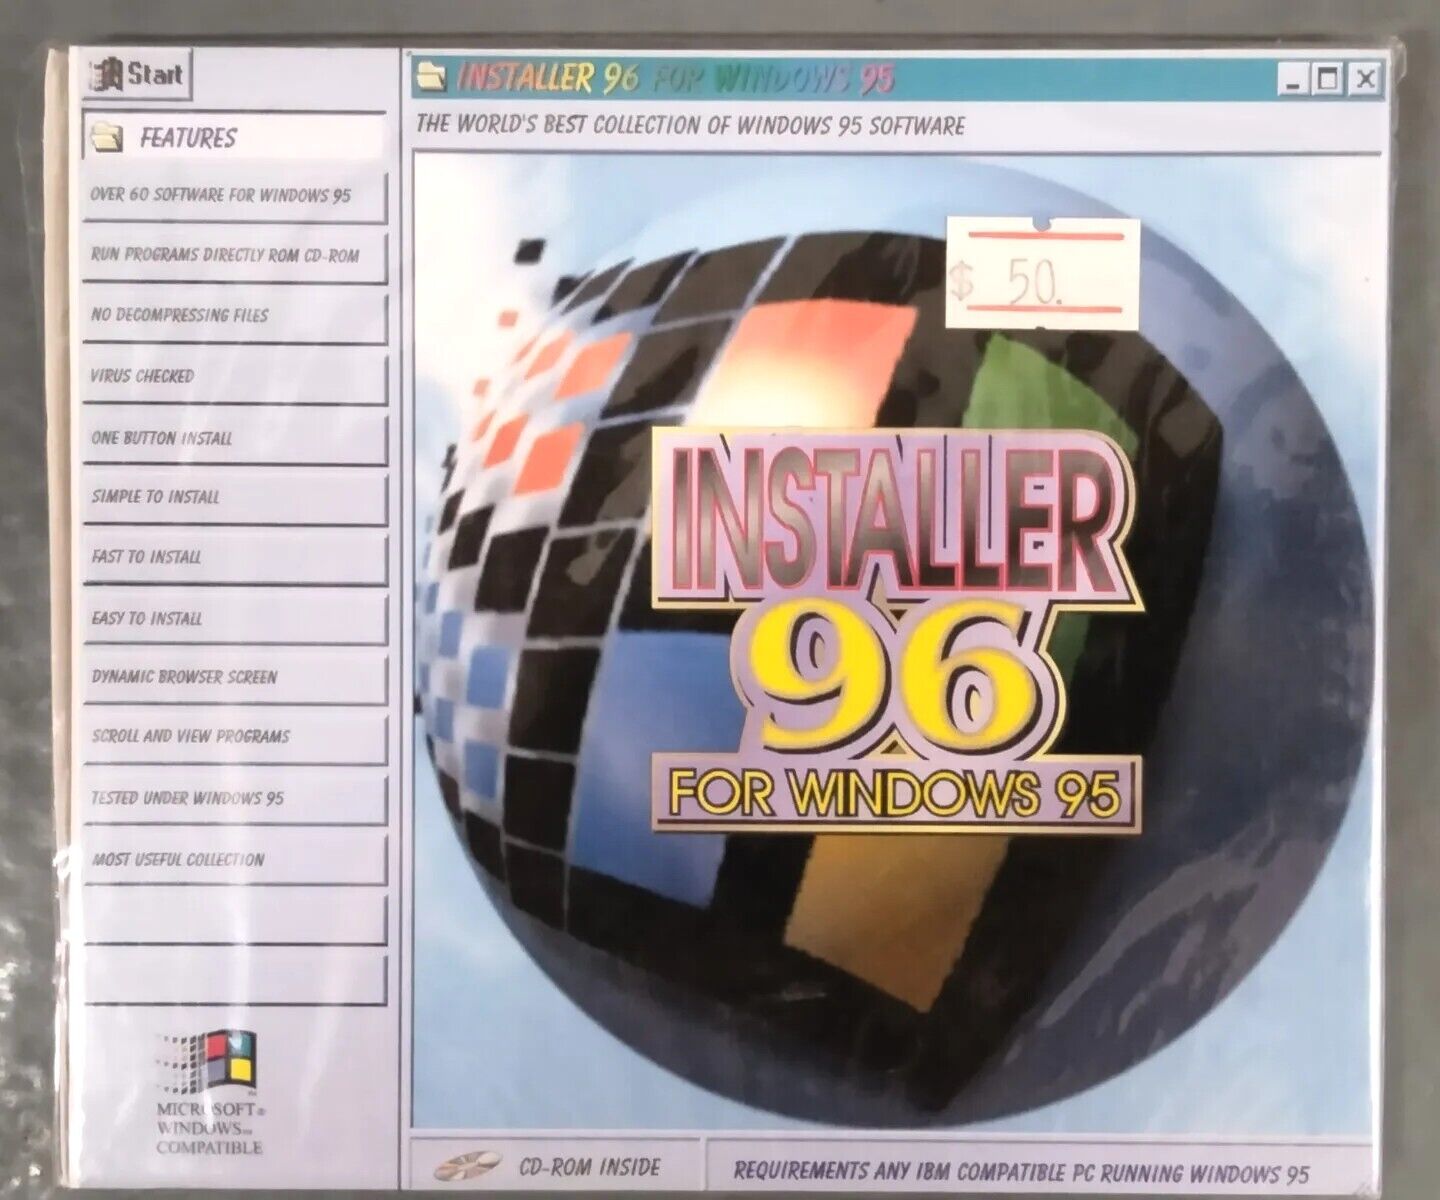 Installer 96 For Windows 95 (PC CD-ROM, 1995, Techwin) RARE OOP Vintage Software